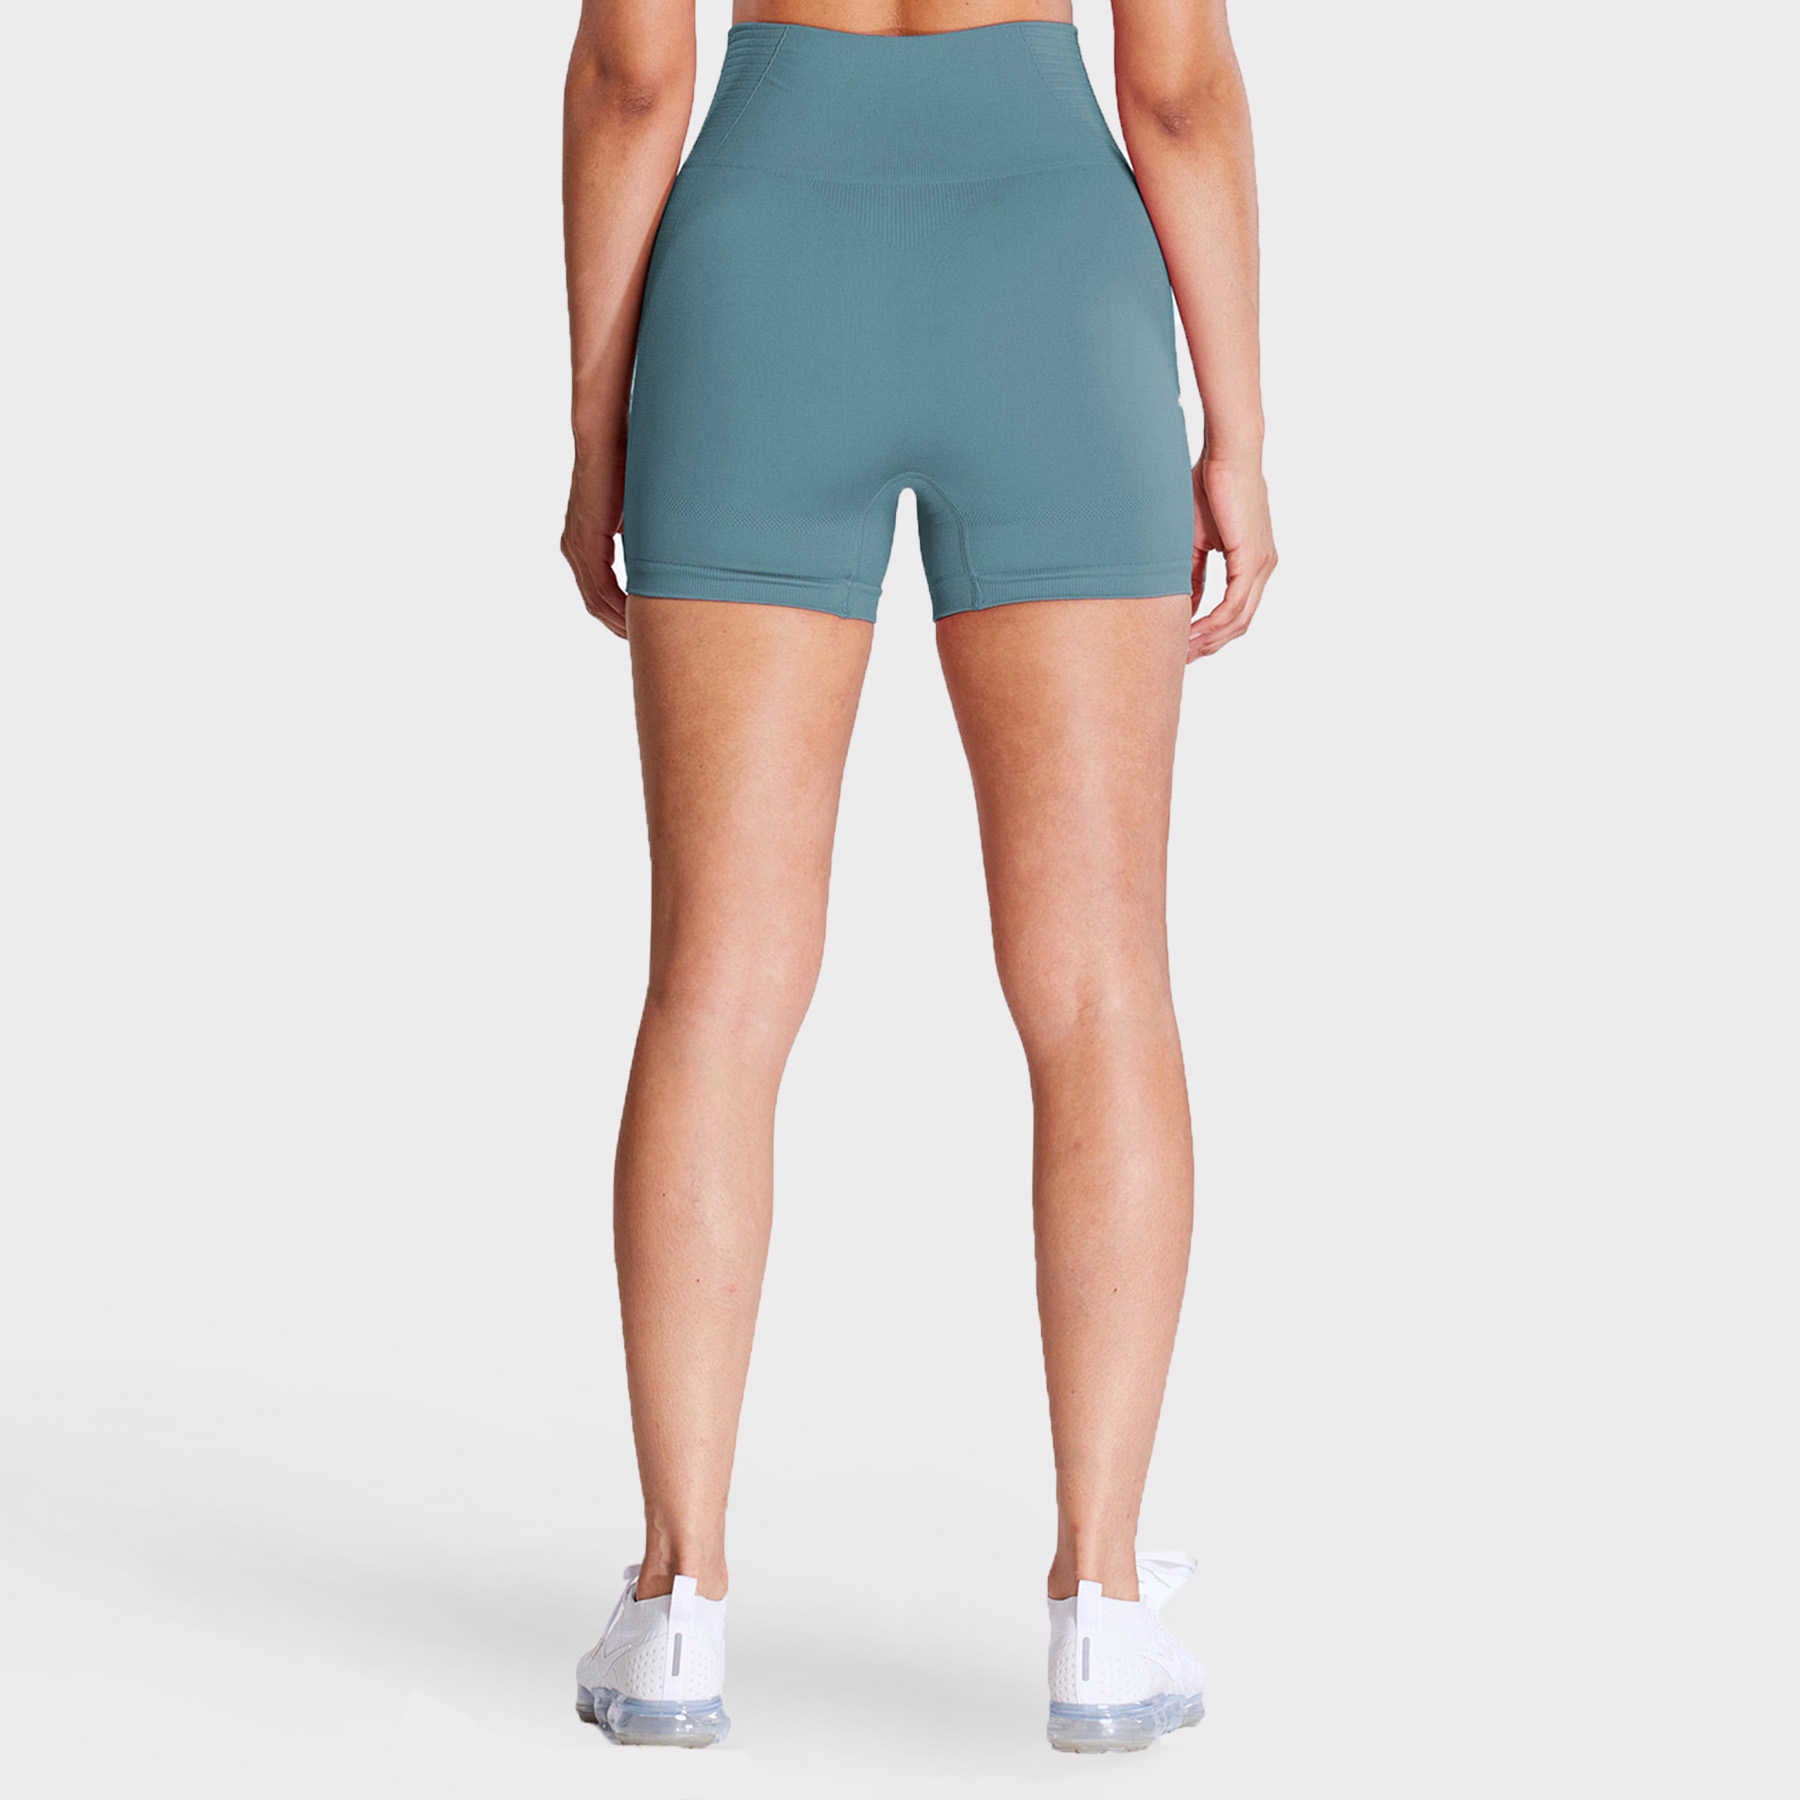 Aoxjox Smile Contour Seamless Biker Shorts for Women High Waist Workout  Shorts Gym Shorts Running Yoga Shorts (Royale Blue Marl, X-Small) at   Women's Clothing store